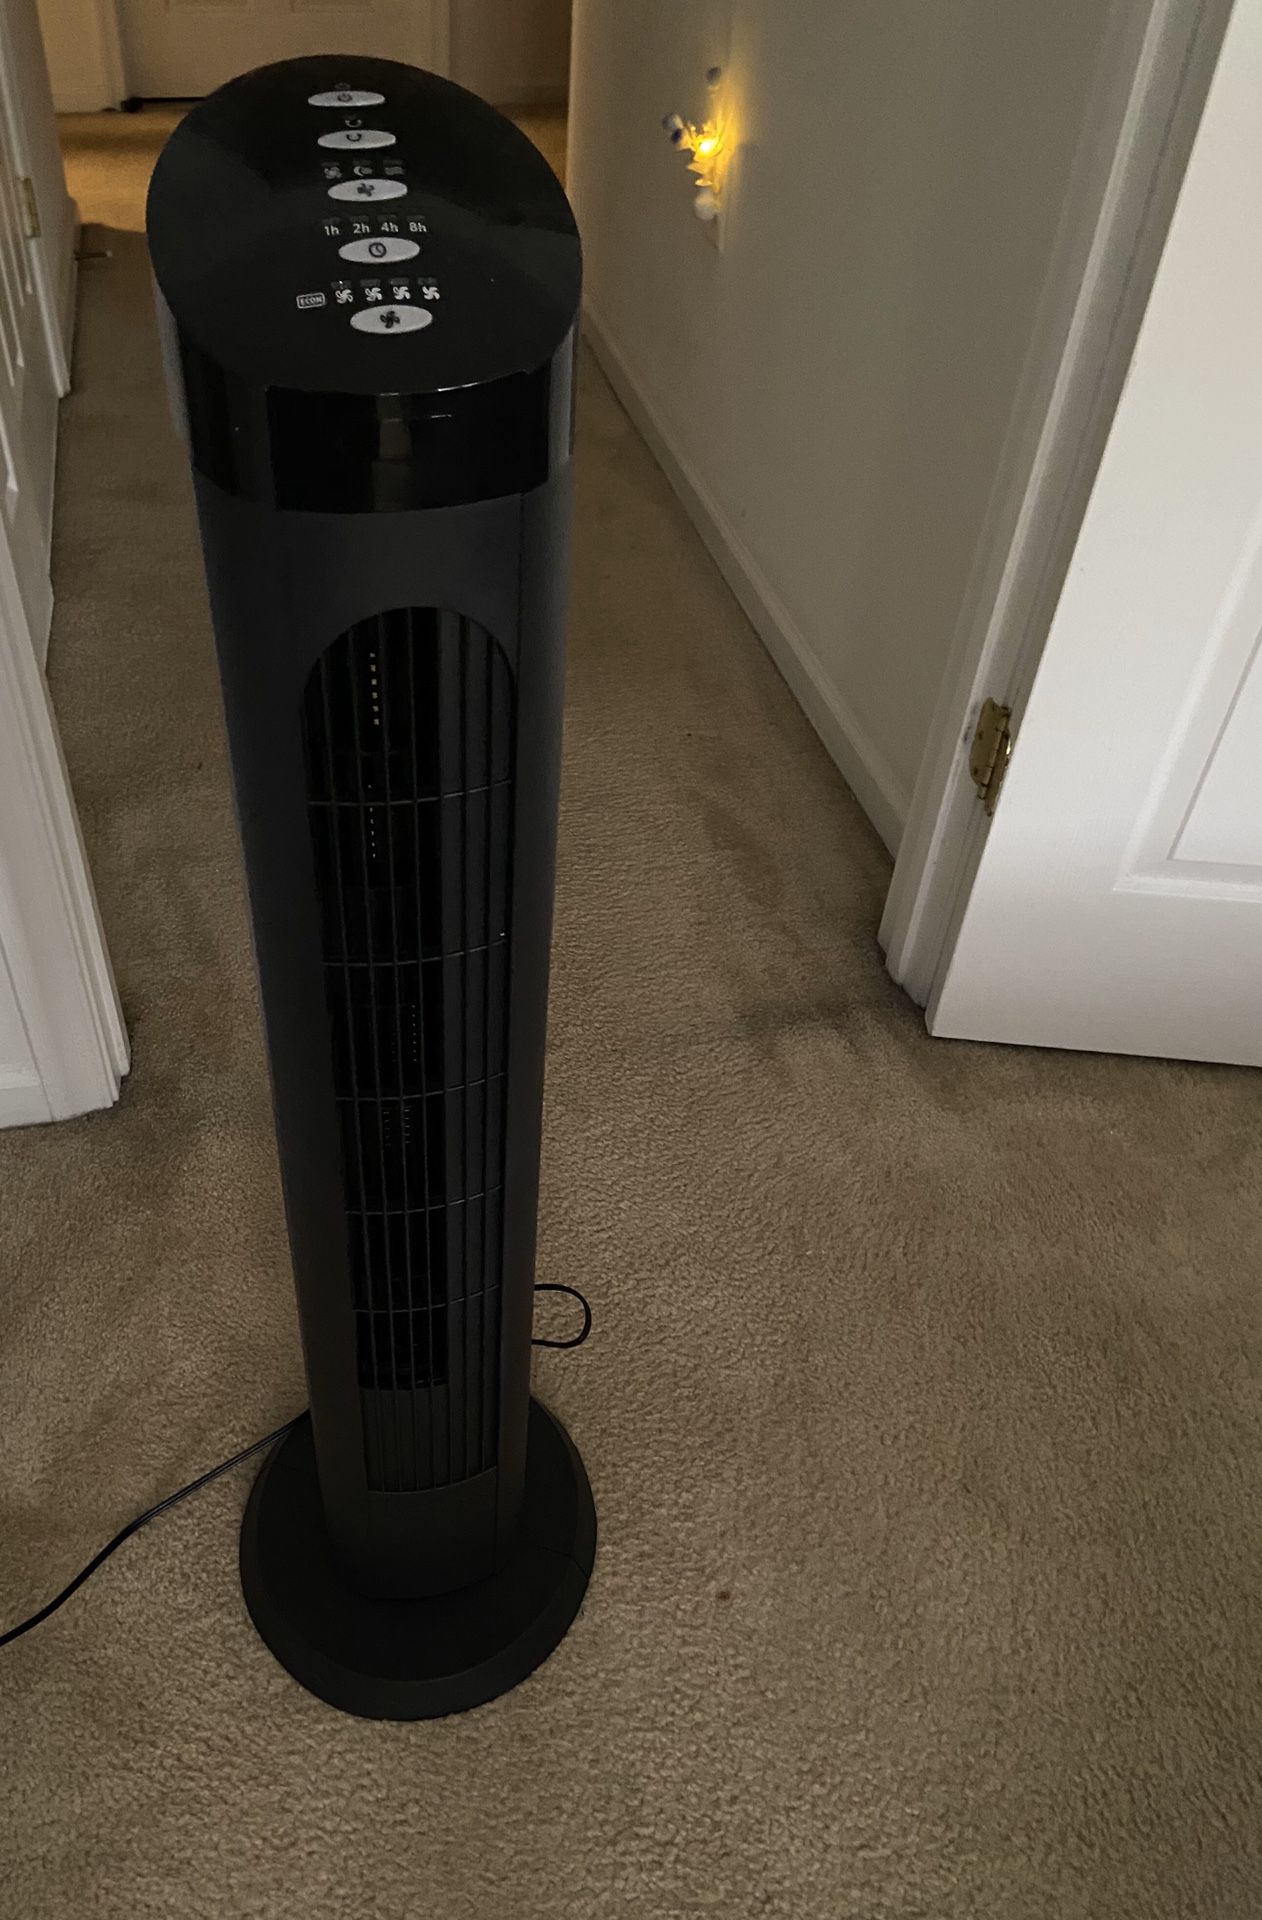 Tower fan with wave option and remote control